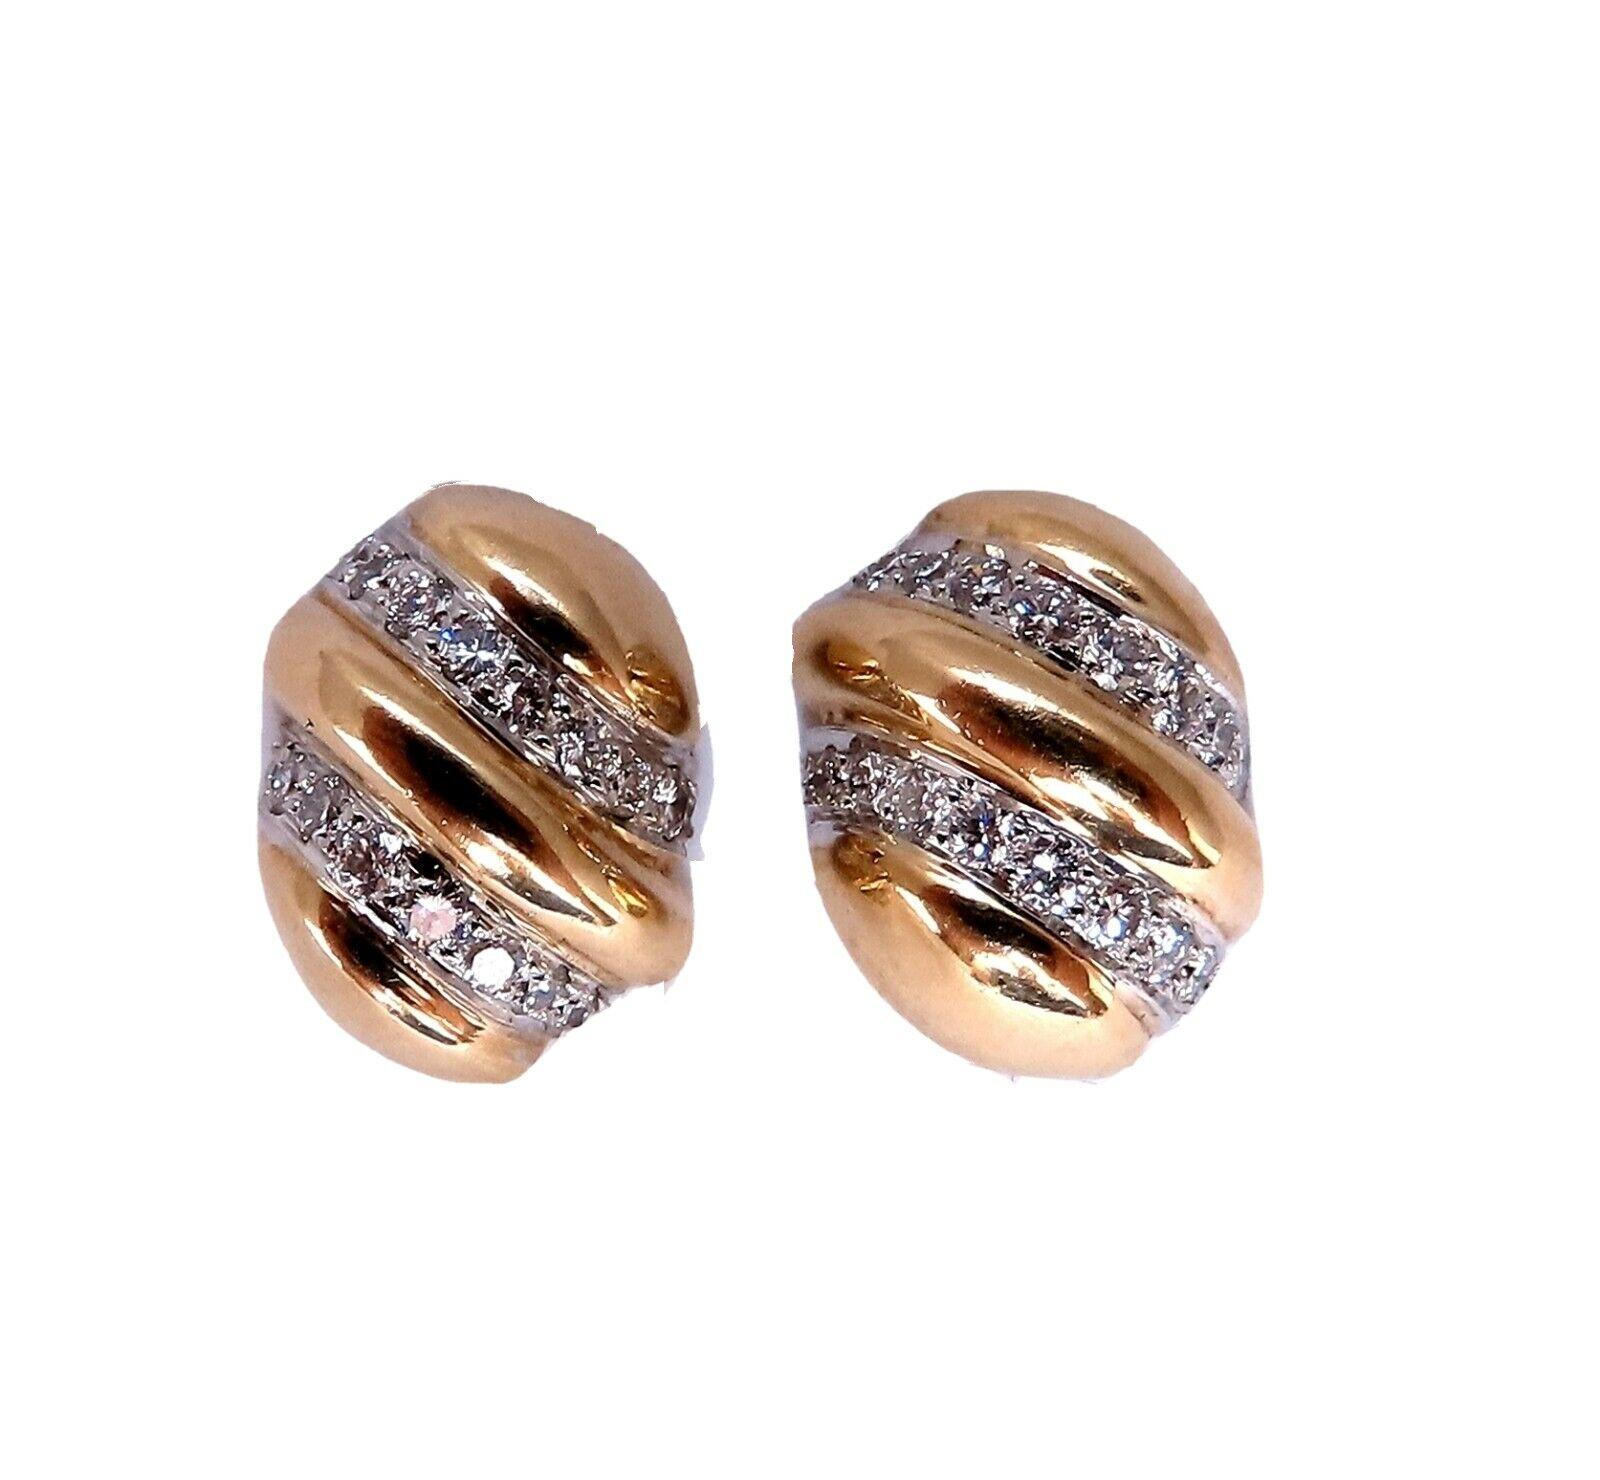 Dome wave diamond earrings.

1.48 carat natural round diamonds

G color vs2 clarity

Platinum &18kt yellow gold 7.2 g

Earrings measure 14x10 mm

Depth:6mm

$4,000 appraisal certificate to accompany